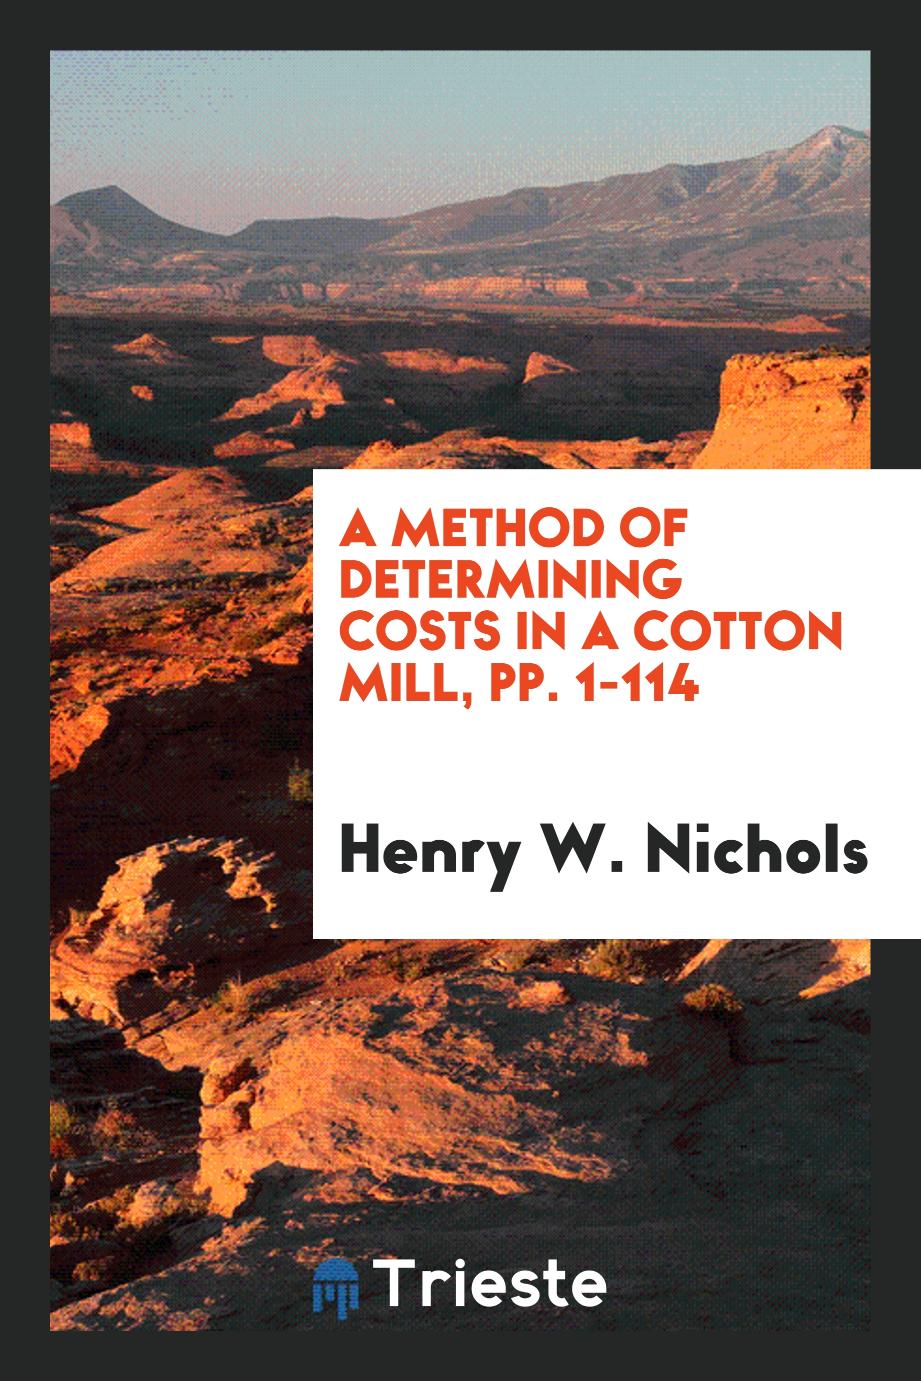 A Method of Determining Costs in a Cotton Mill, pp. 1-114